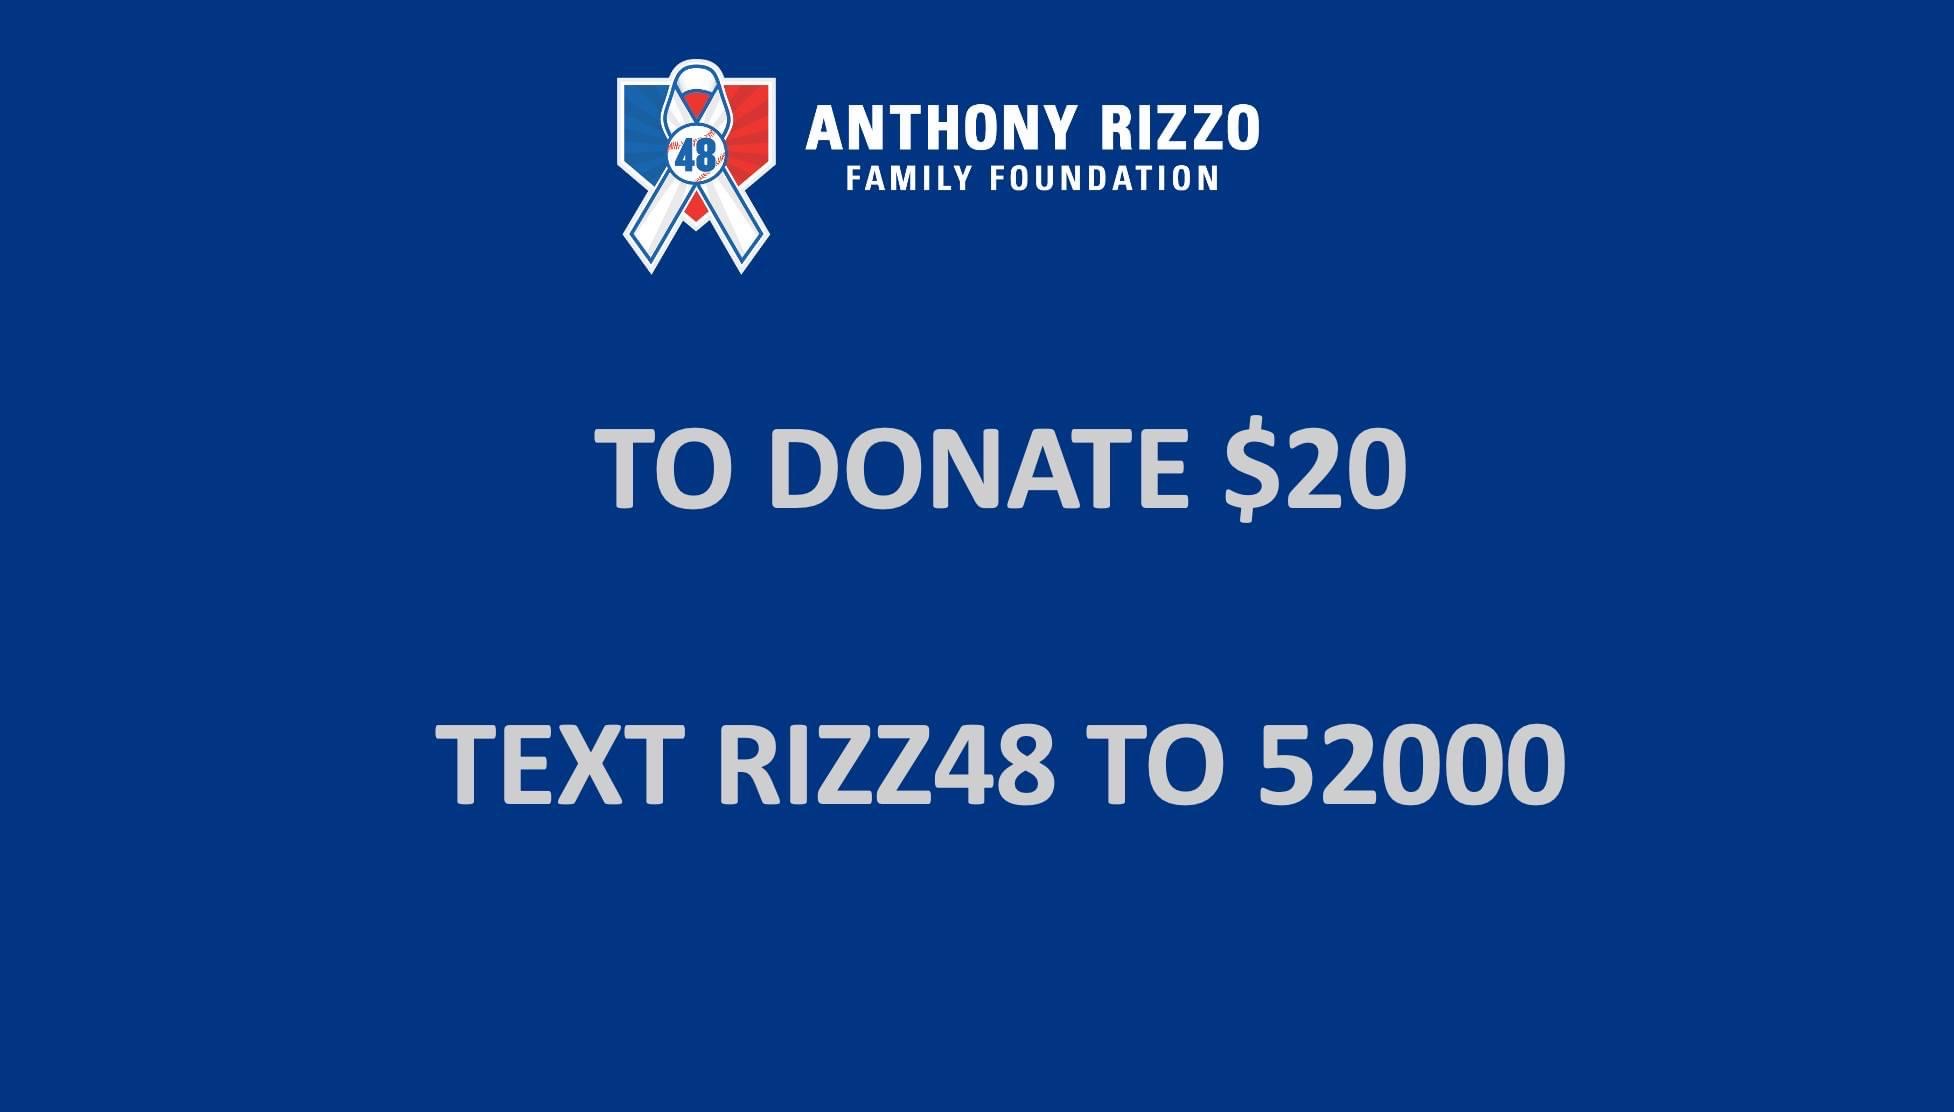 Short Code Anthony Rizzo Family Foundation text messaging